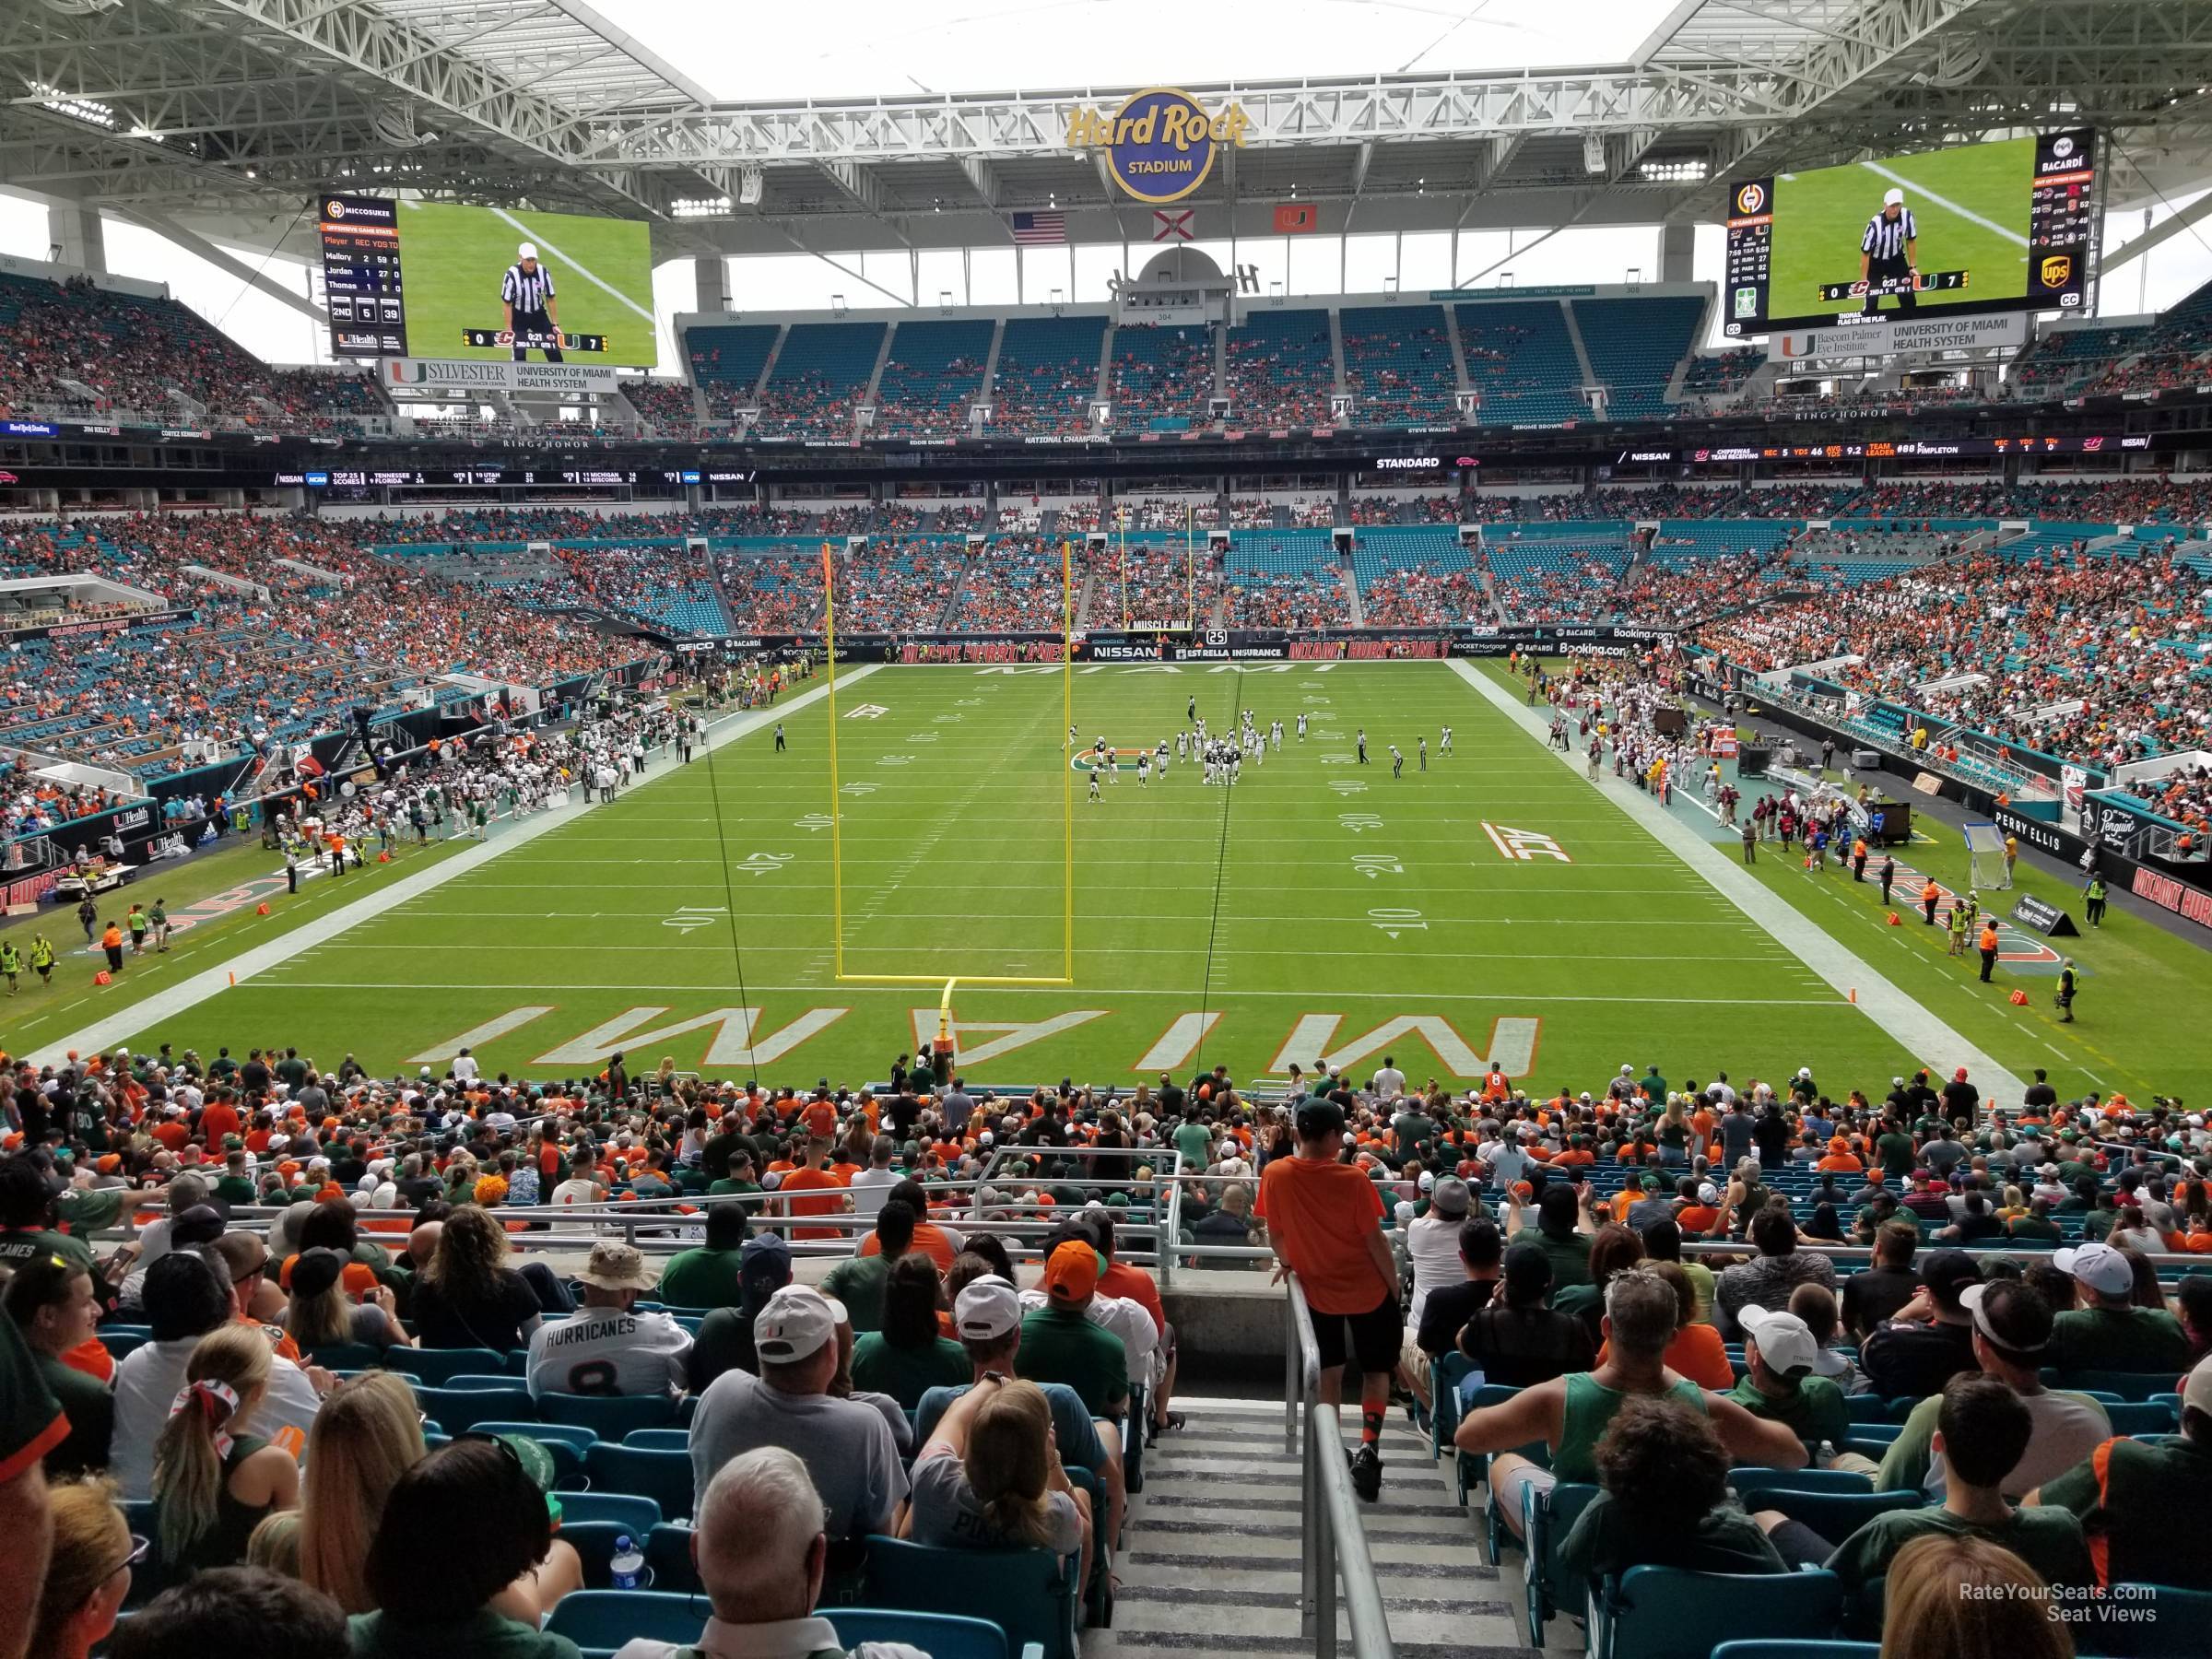 section 232, row 10 seat view  for football - hard rock stadium